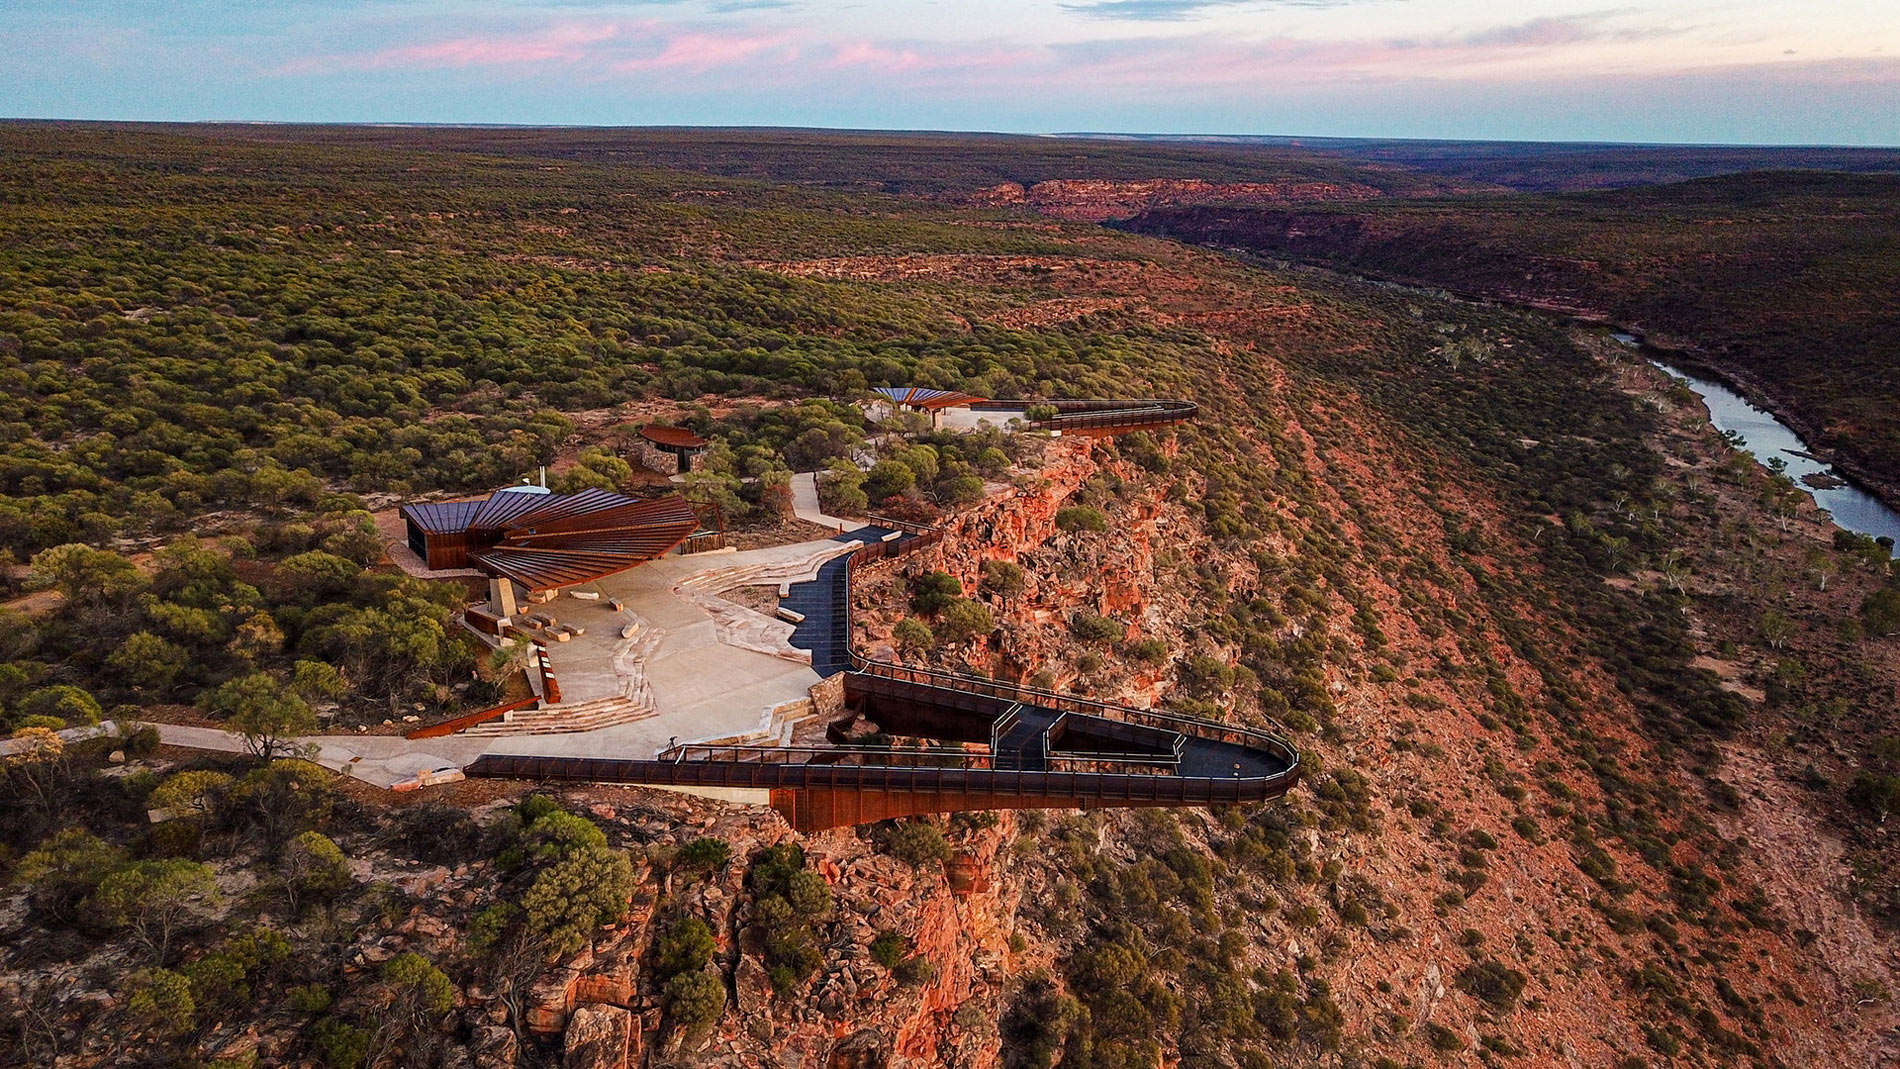 Landscape architecture project ‘Kaju Yatka (Kalbarri Skywalk)’. Winner of 2021 AILA National Award of Excellence for Tourism, 2021 AILA WA Award of Excellence for Tourism, 2021 AILA WA Medal and 2021 AILA WA Award for Regional Achievement. Project by Department of Biodiversity, Conservation and Attractions. Indigenous country Nanda. Photo by DBCA